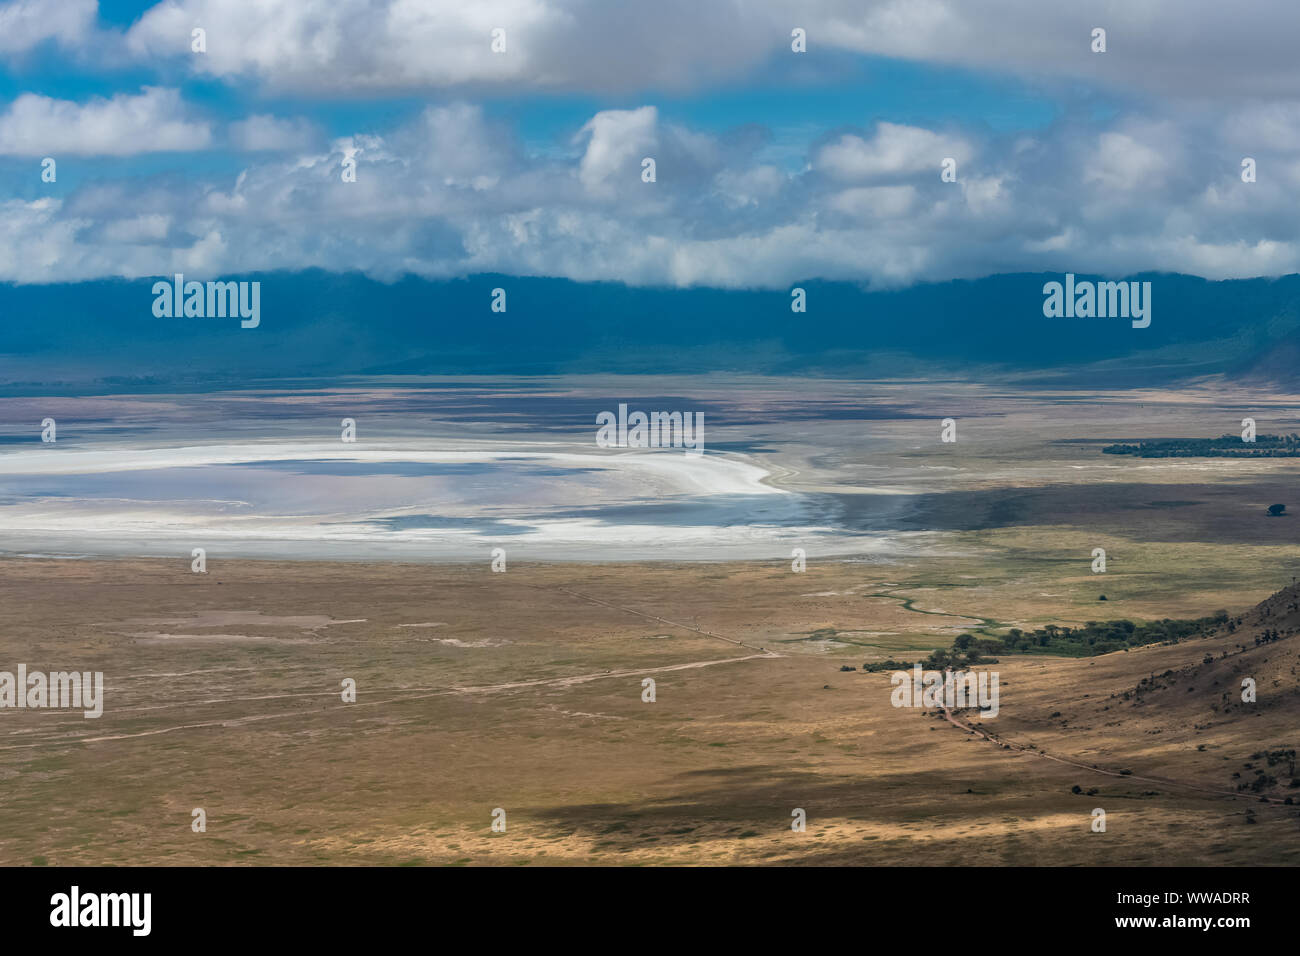 Tanzania, view of the Ngorongoro crater, beautiful landscape with different animals living together Stock Photo